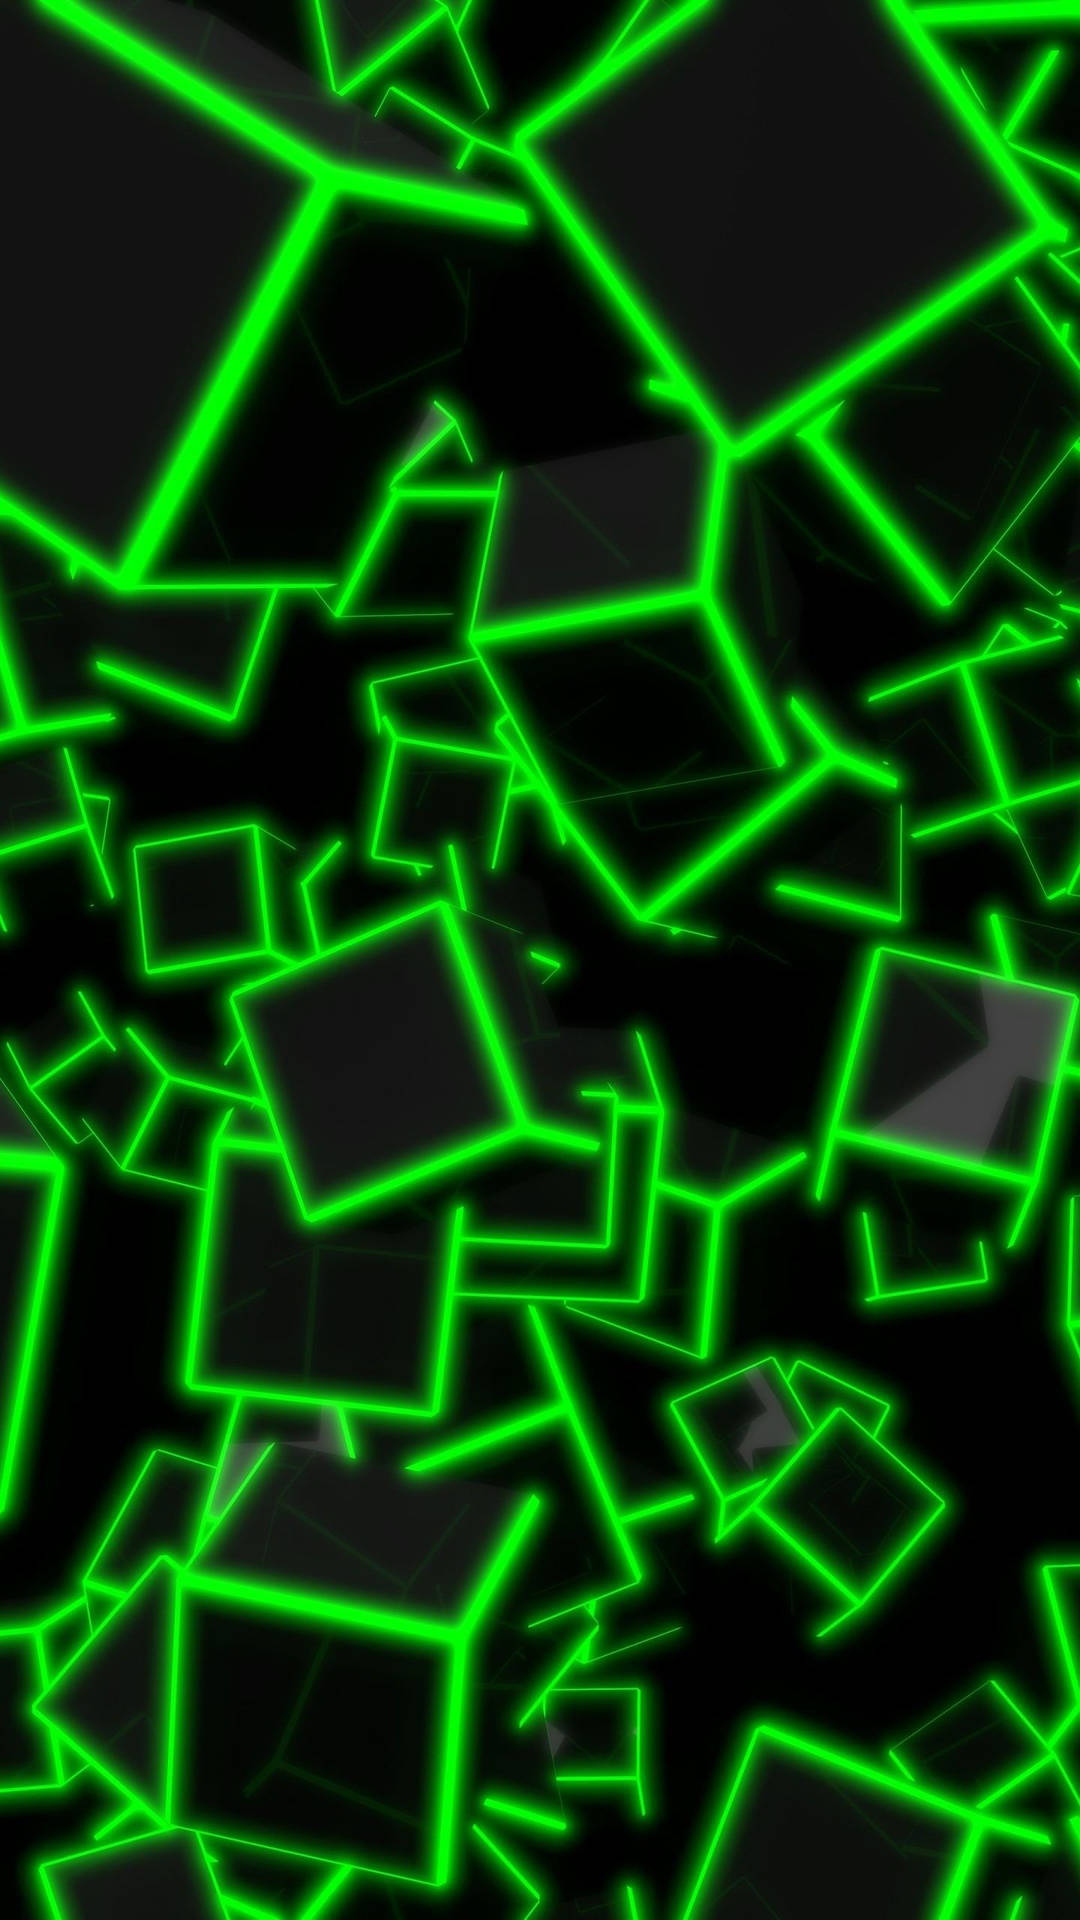 Overlapping Cool Green Squares